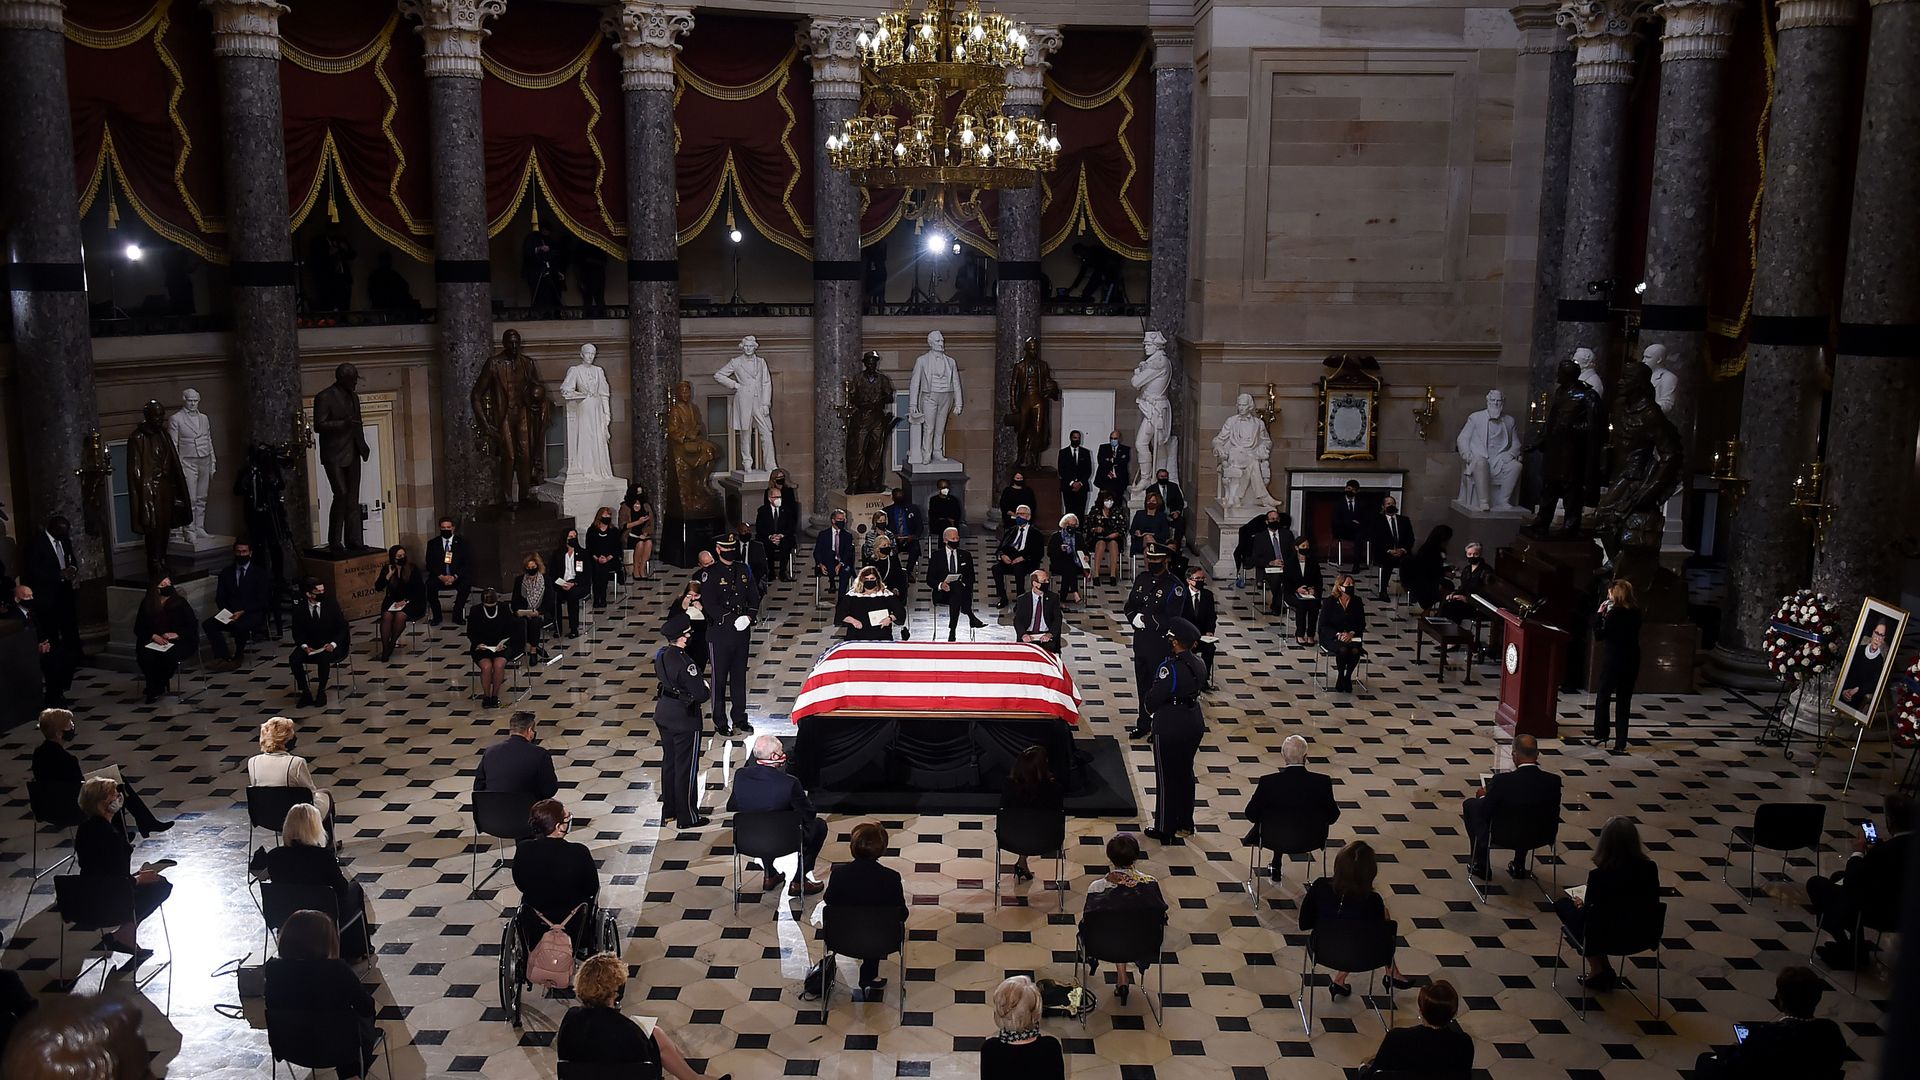 Members of Congress and guests pay their respects to the late Associate Justice Ruth Bader Ginsburg.